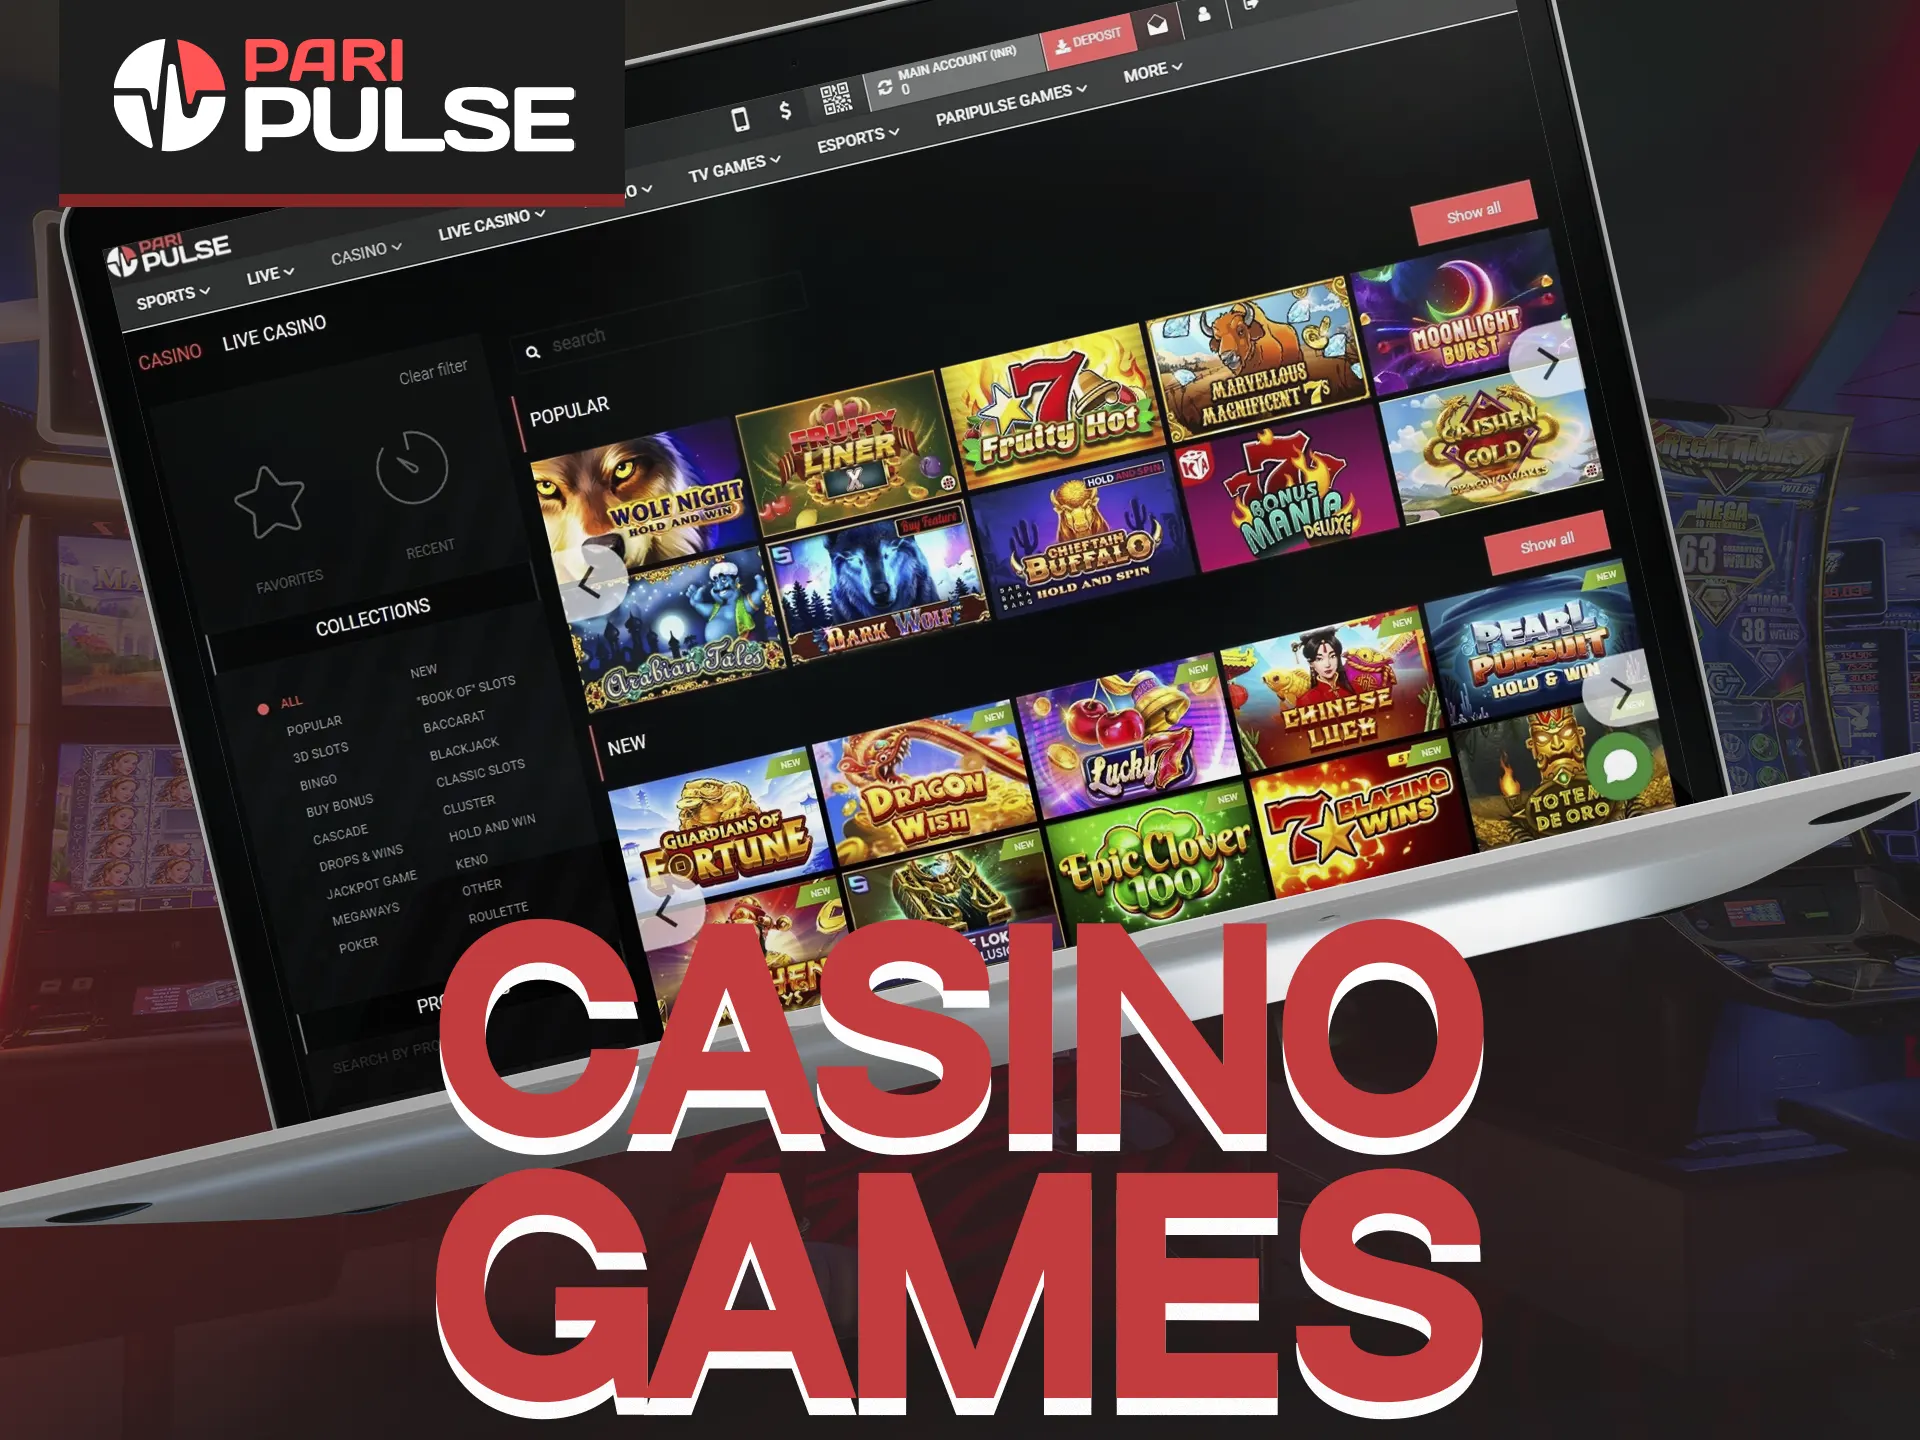 Check out the most popular casino games at PariPulse.